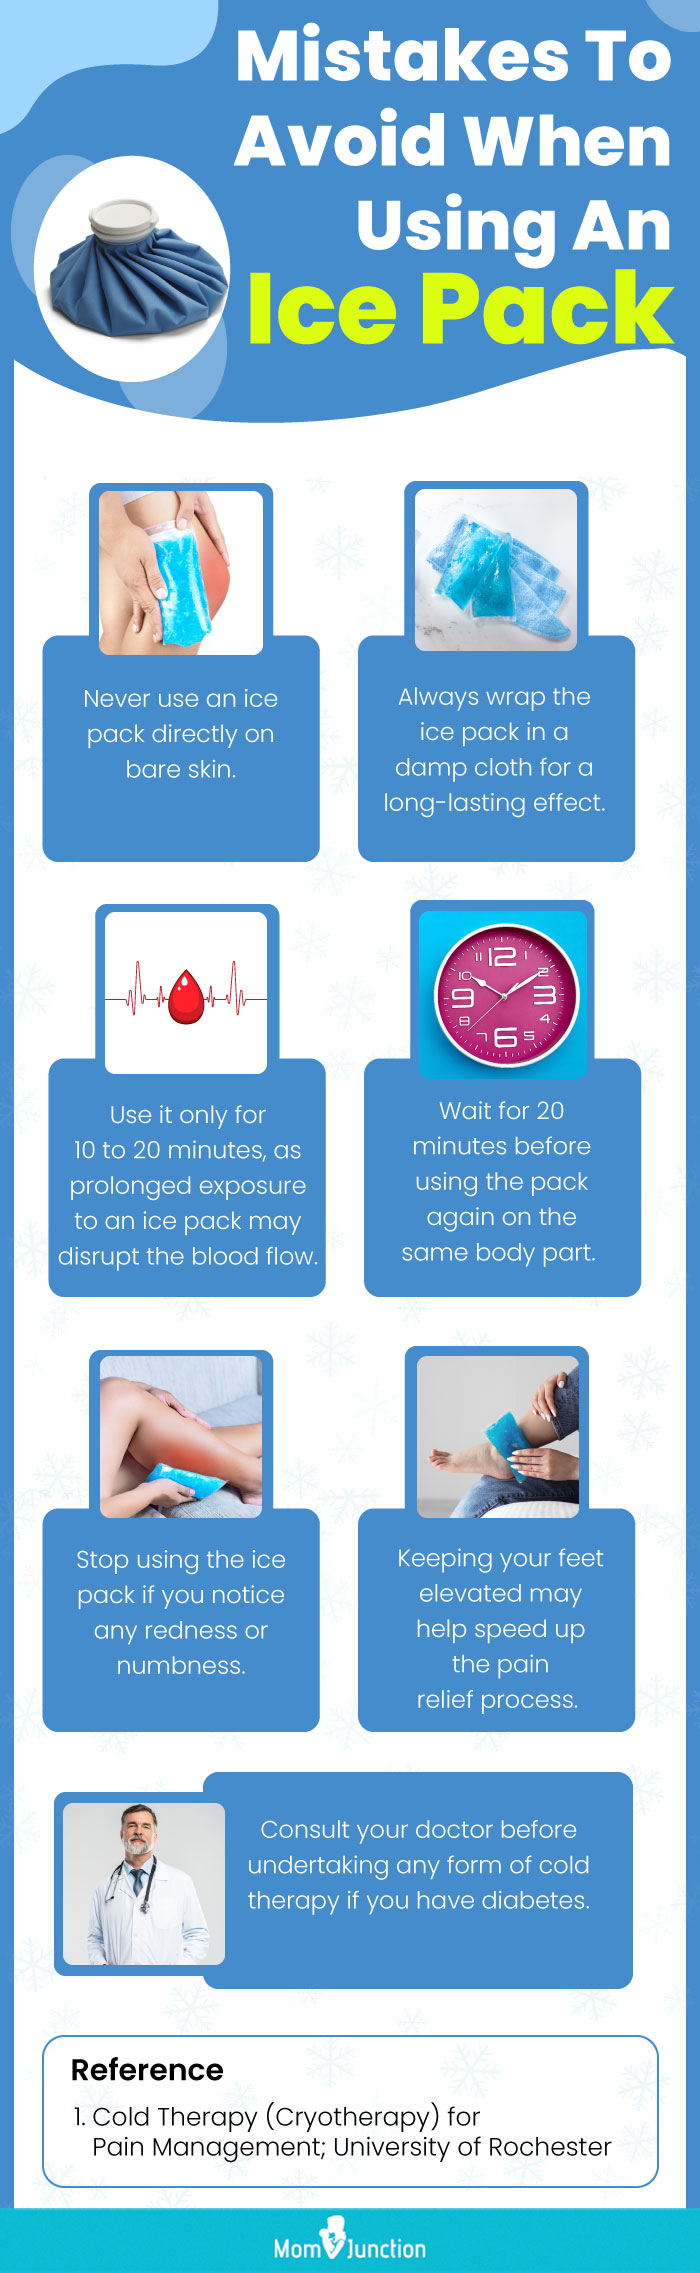 Mistakes To Avoid When Using An Ice pack (infographic)